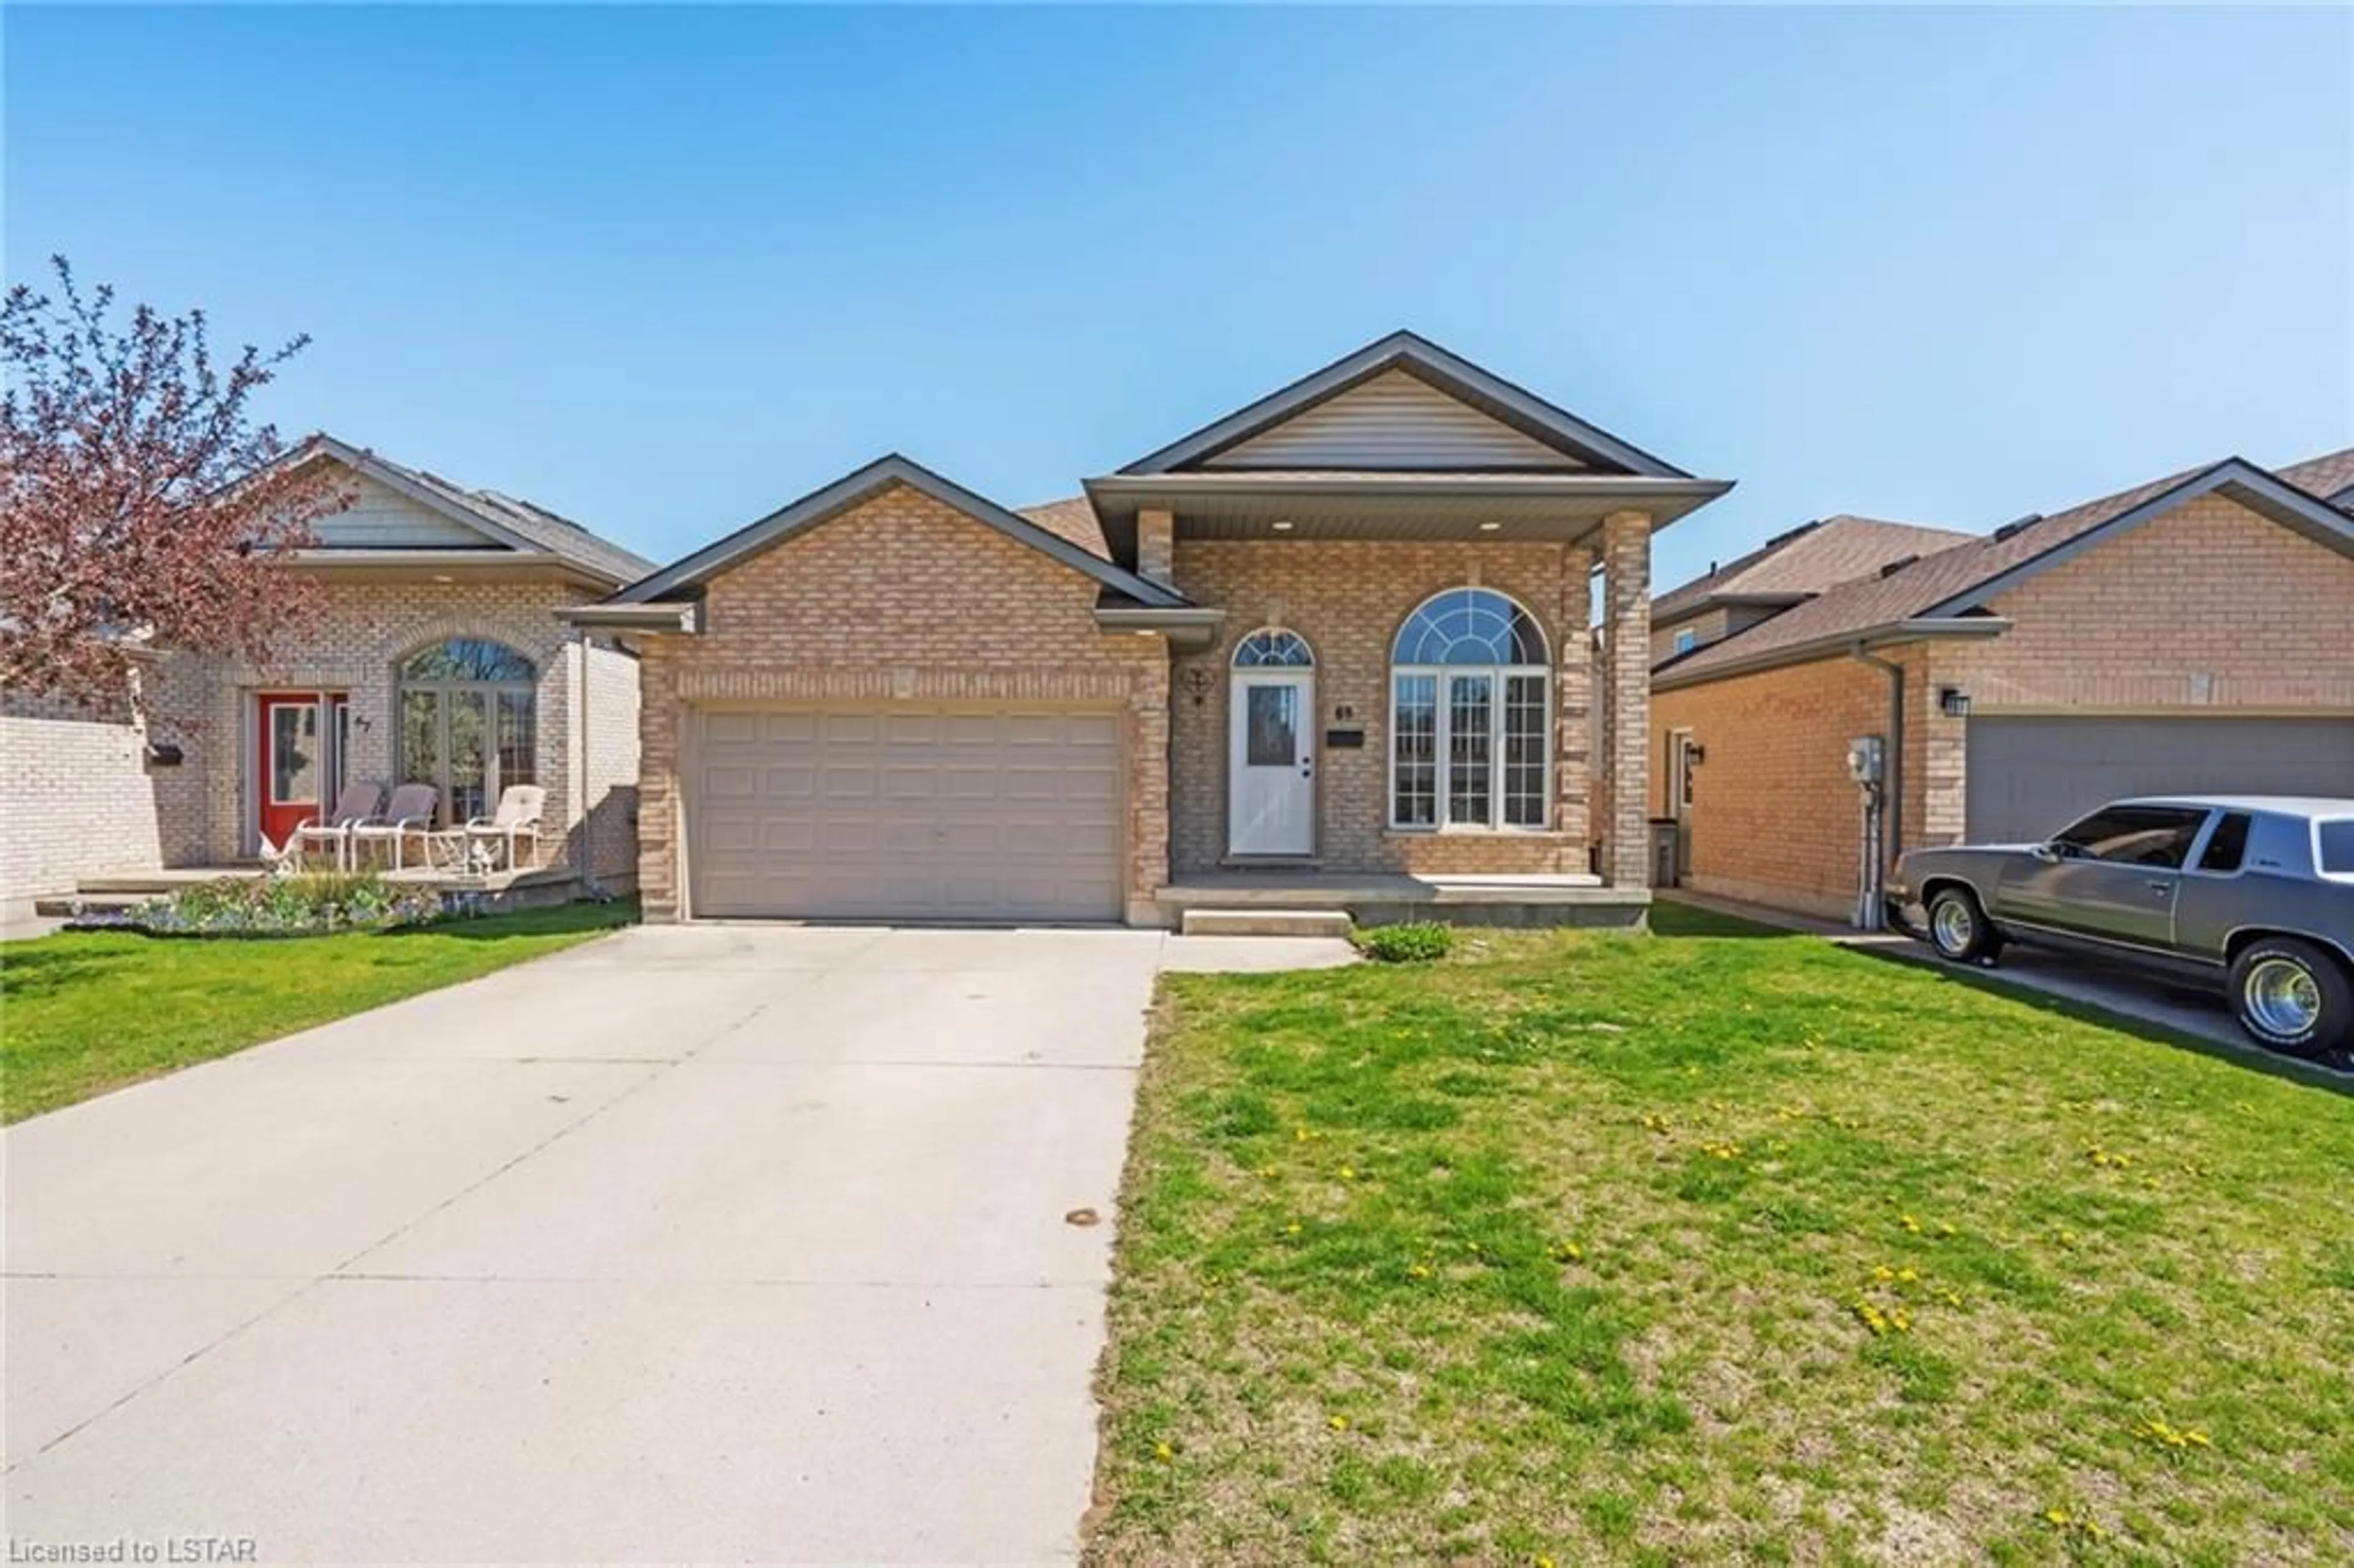 Frontside or backside of a home for 69 Bridle Path, Strathroy Ontario N7G 4J9